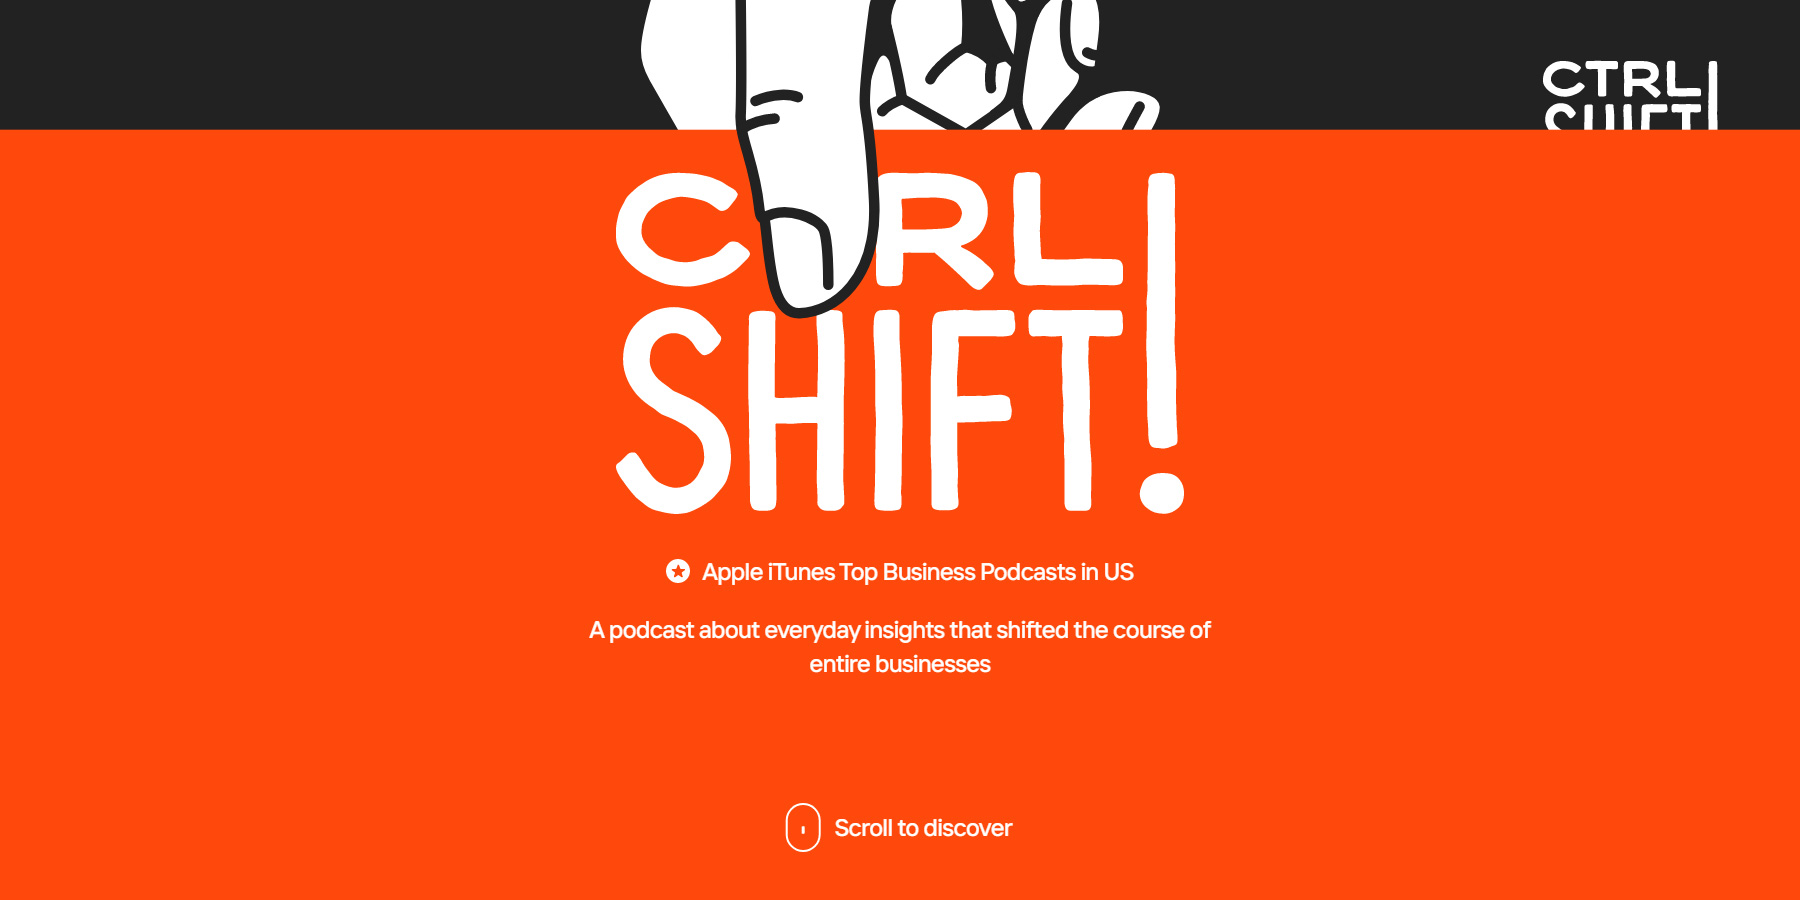 CTRL SHIFT podcast - Website of the Day